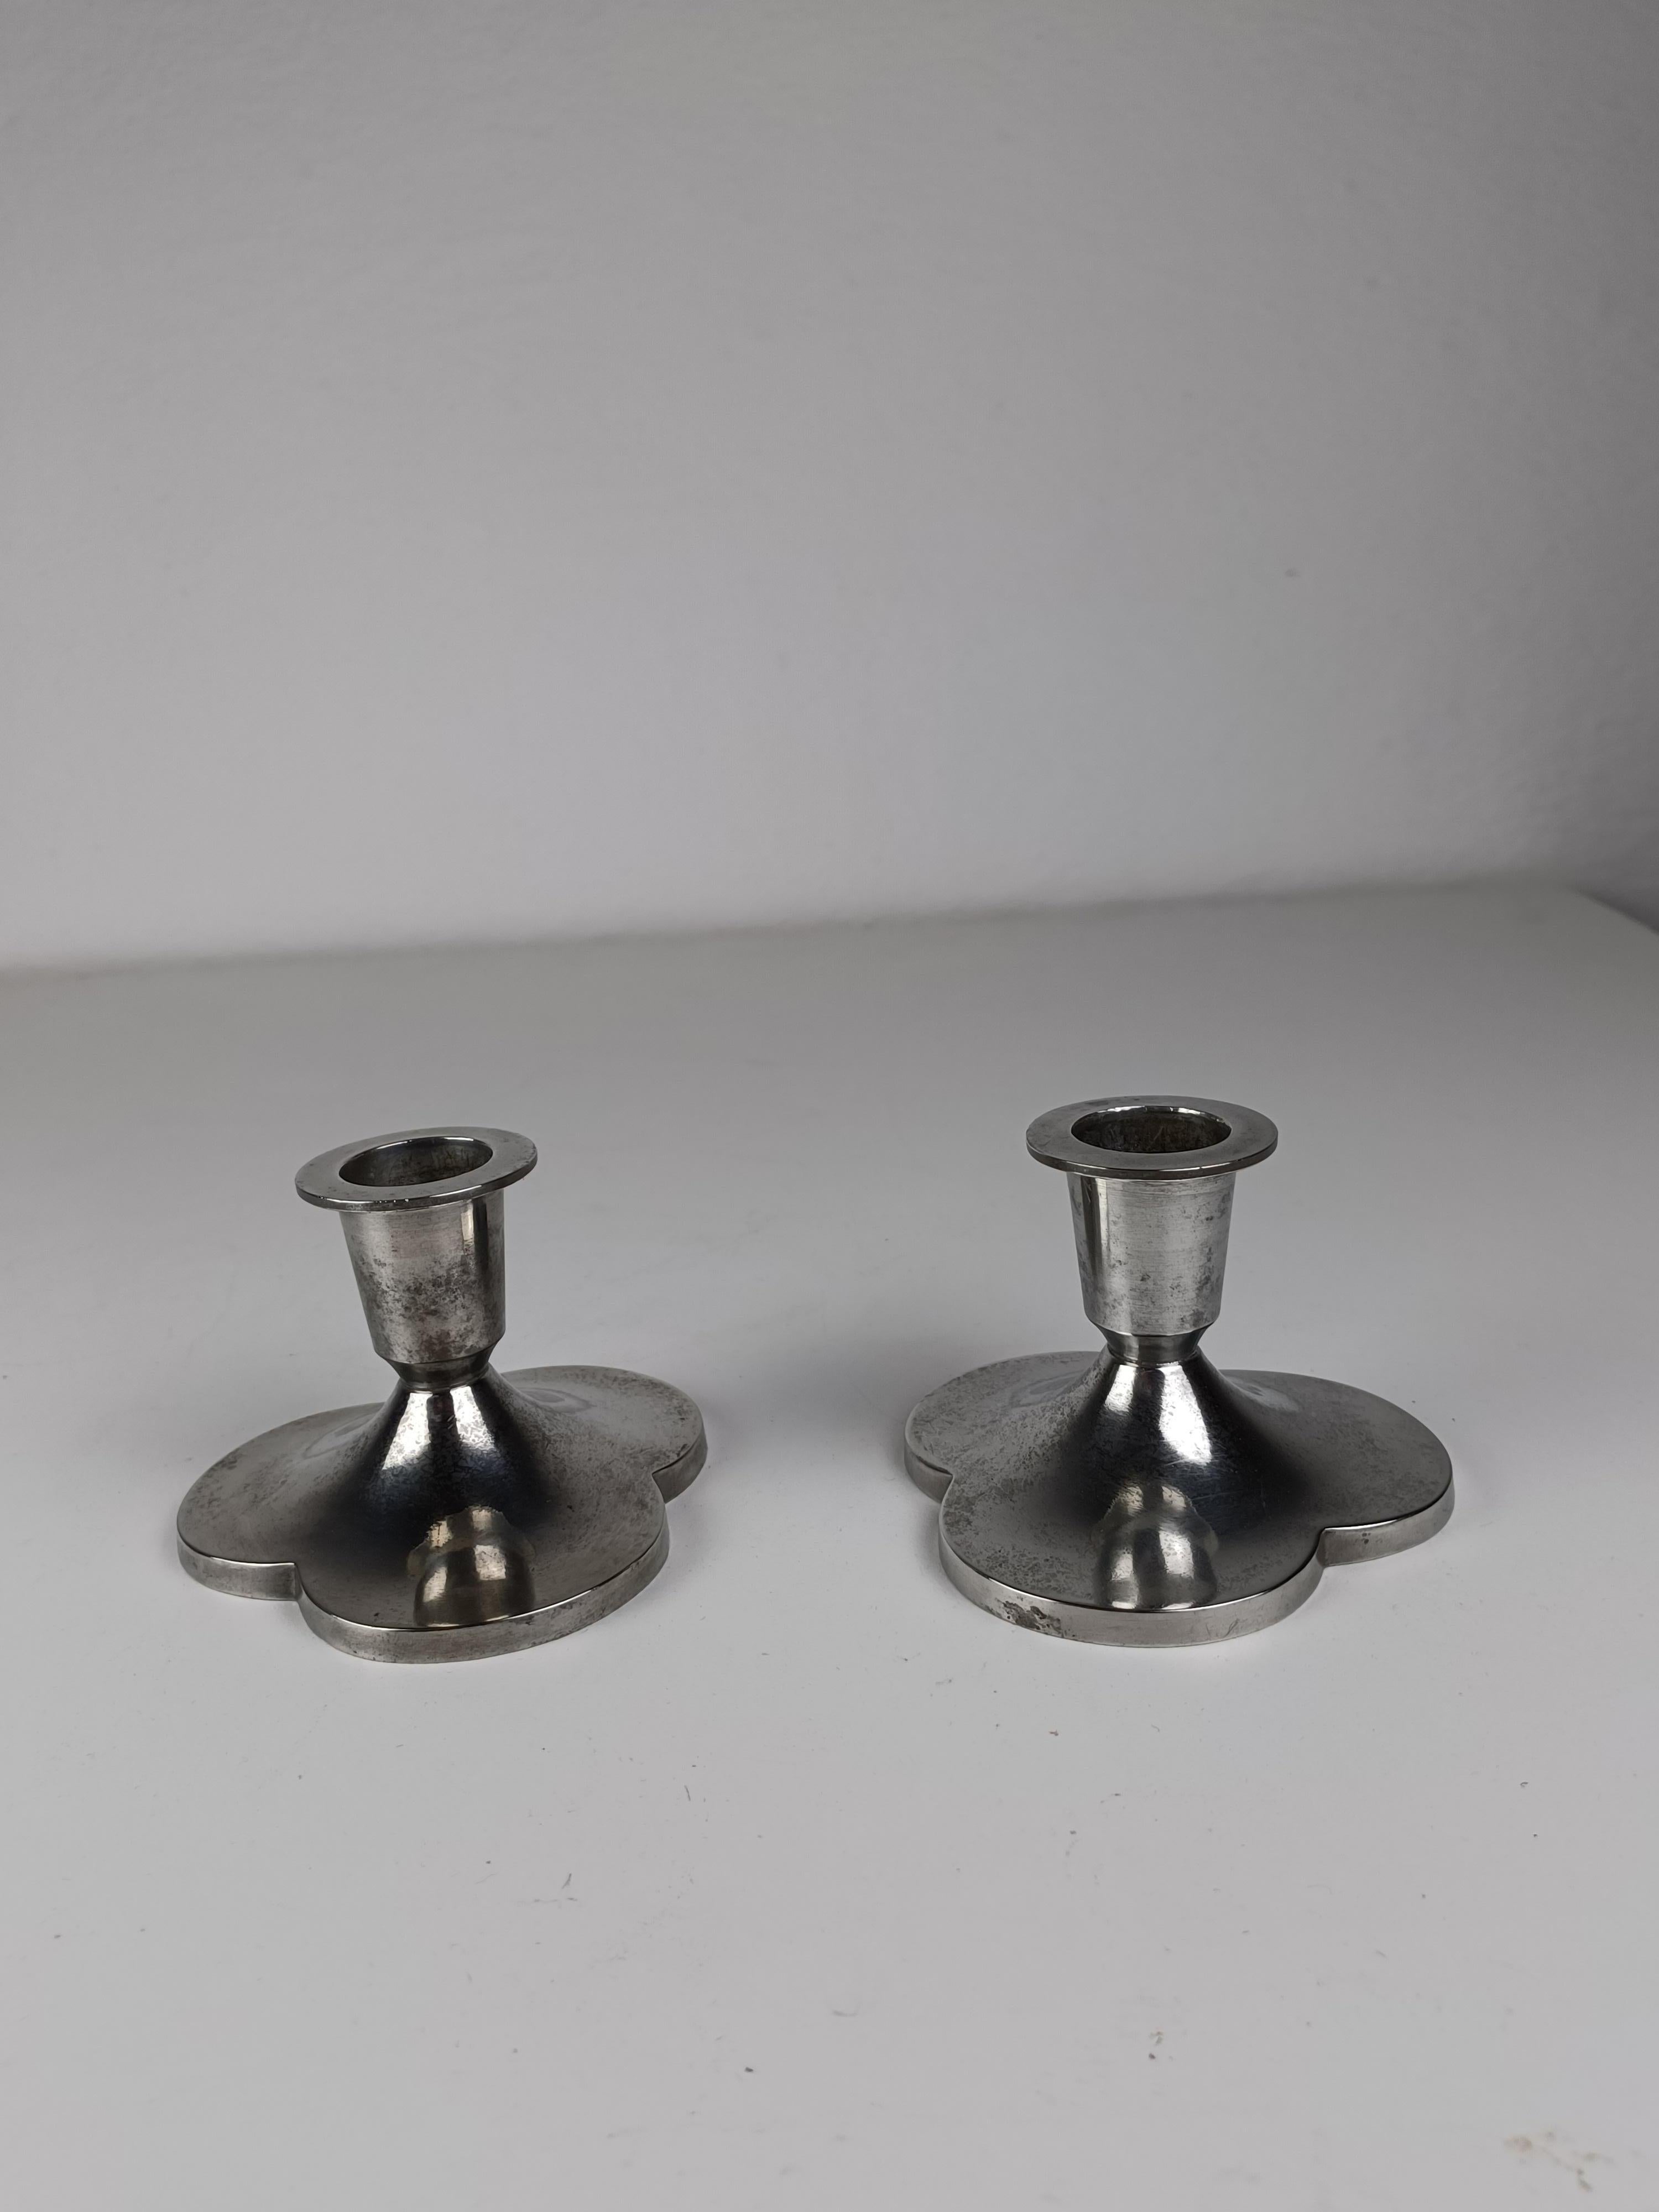 Set of two Danish Just Andersen Art Deco three clover pewter candle holders produced by Just Andersen A/S in the 1930s.

The candle holders are in good vintage condition and marked with Just. Andersens triangle mark. 

Just Andersen 1884-1943